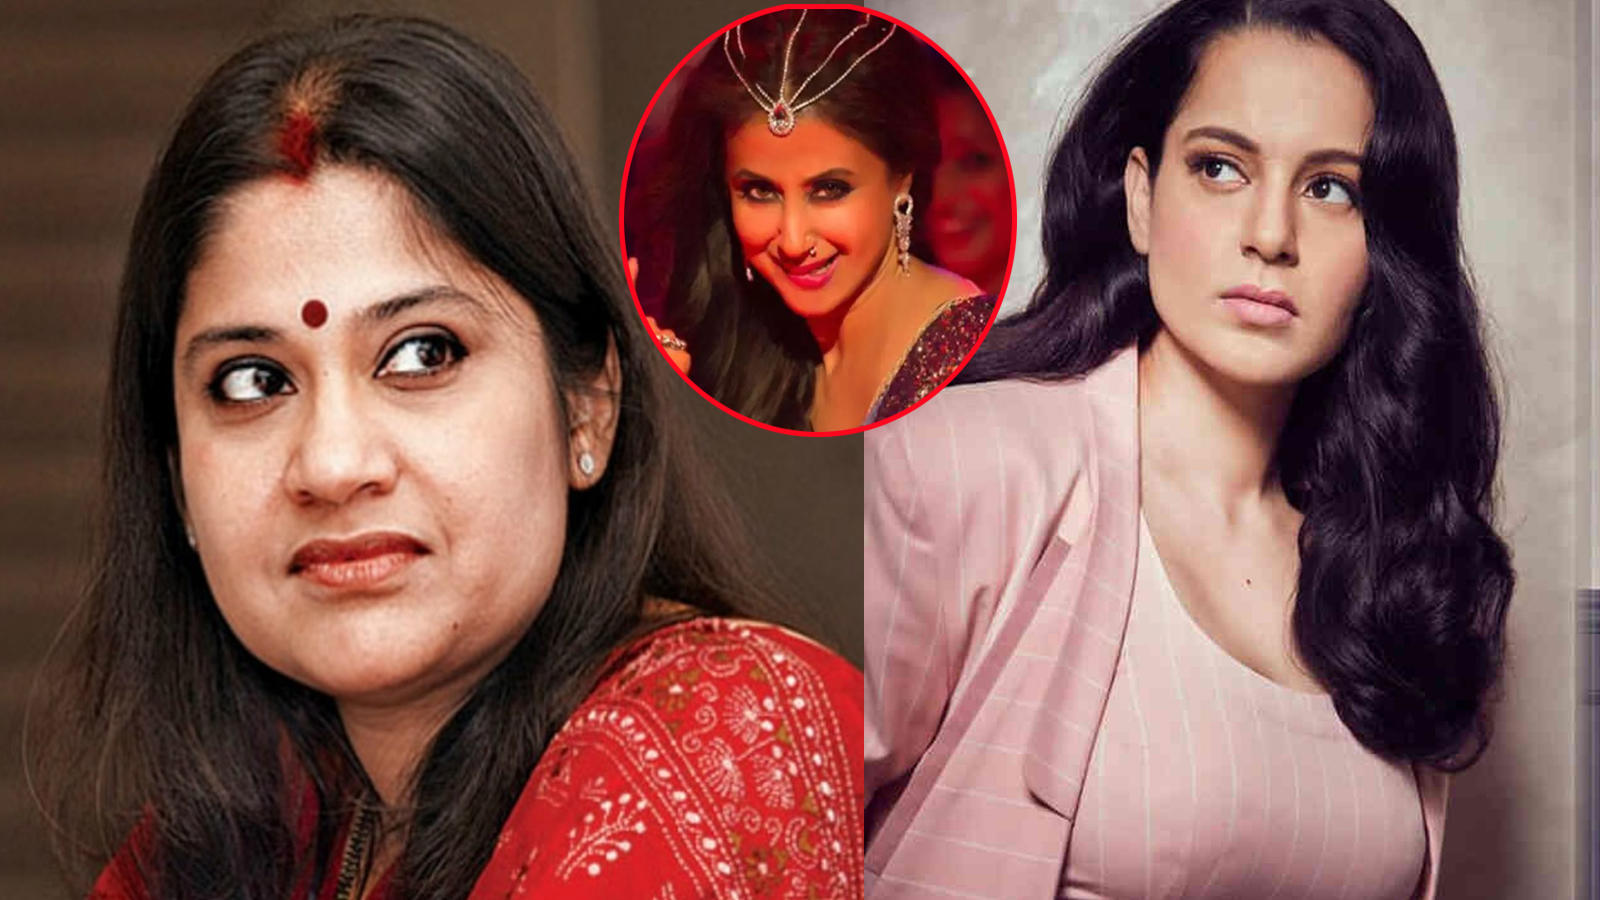 Sex With Tapsi Pannu - Renuka Shahane reacts to Kangana Ranaut's 'soft porn star' comment on  Urmila Matondkar, says 'It crosses the line of decency' | Hindi Movie News  - Bollywood - Times of India